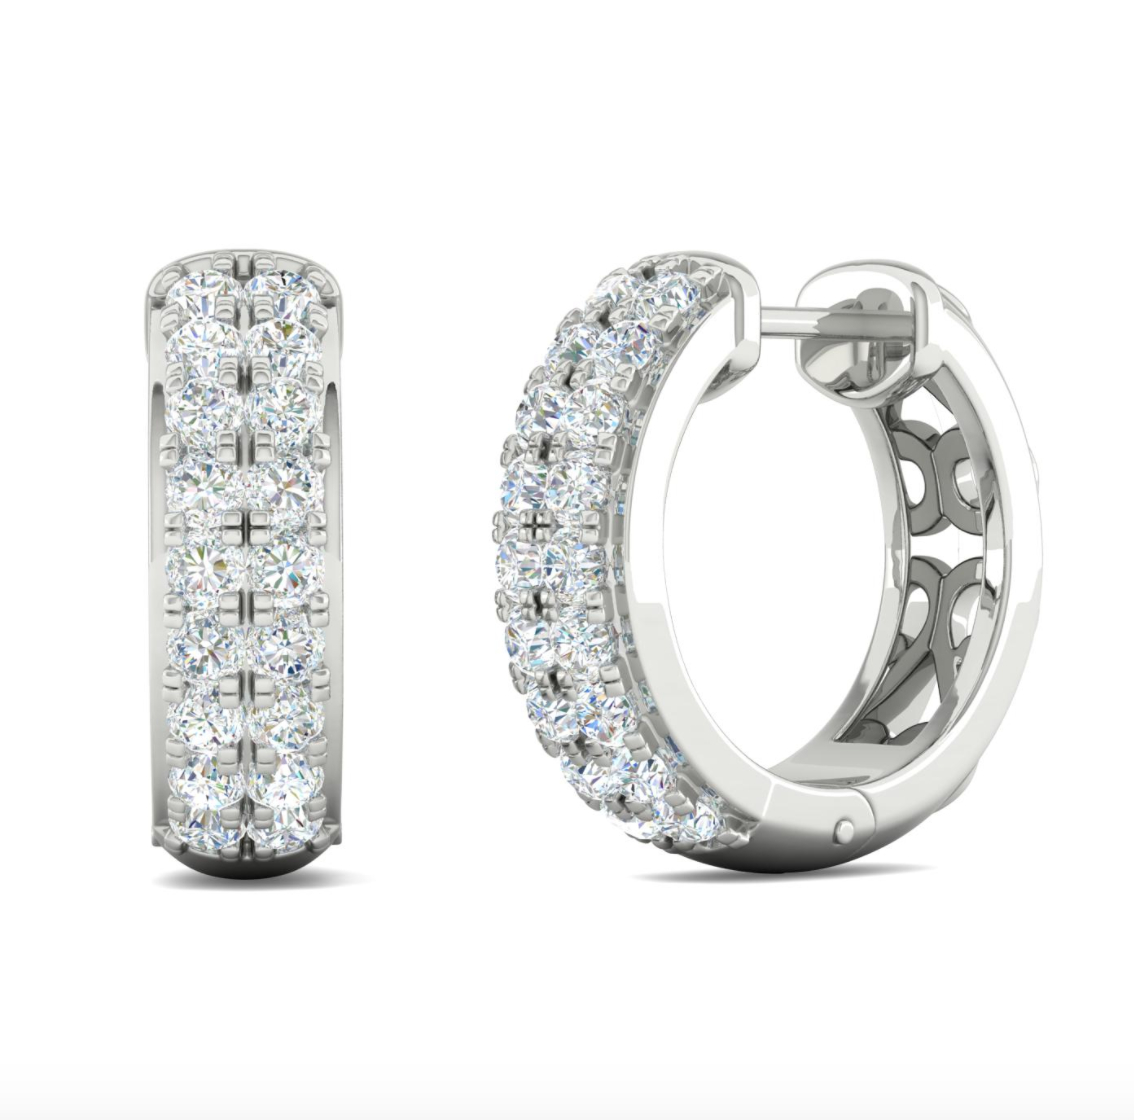 14kt Gold Diamond Hoops / Huggies Style Earrings Available in Two-Tone, White or yellow Gold